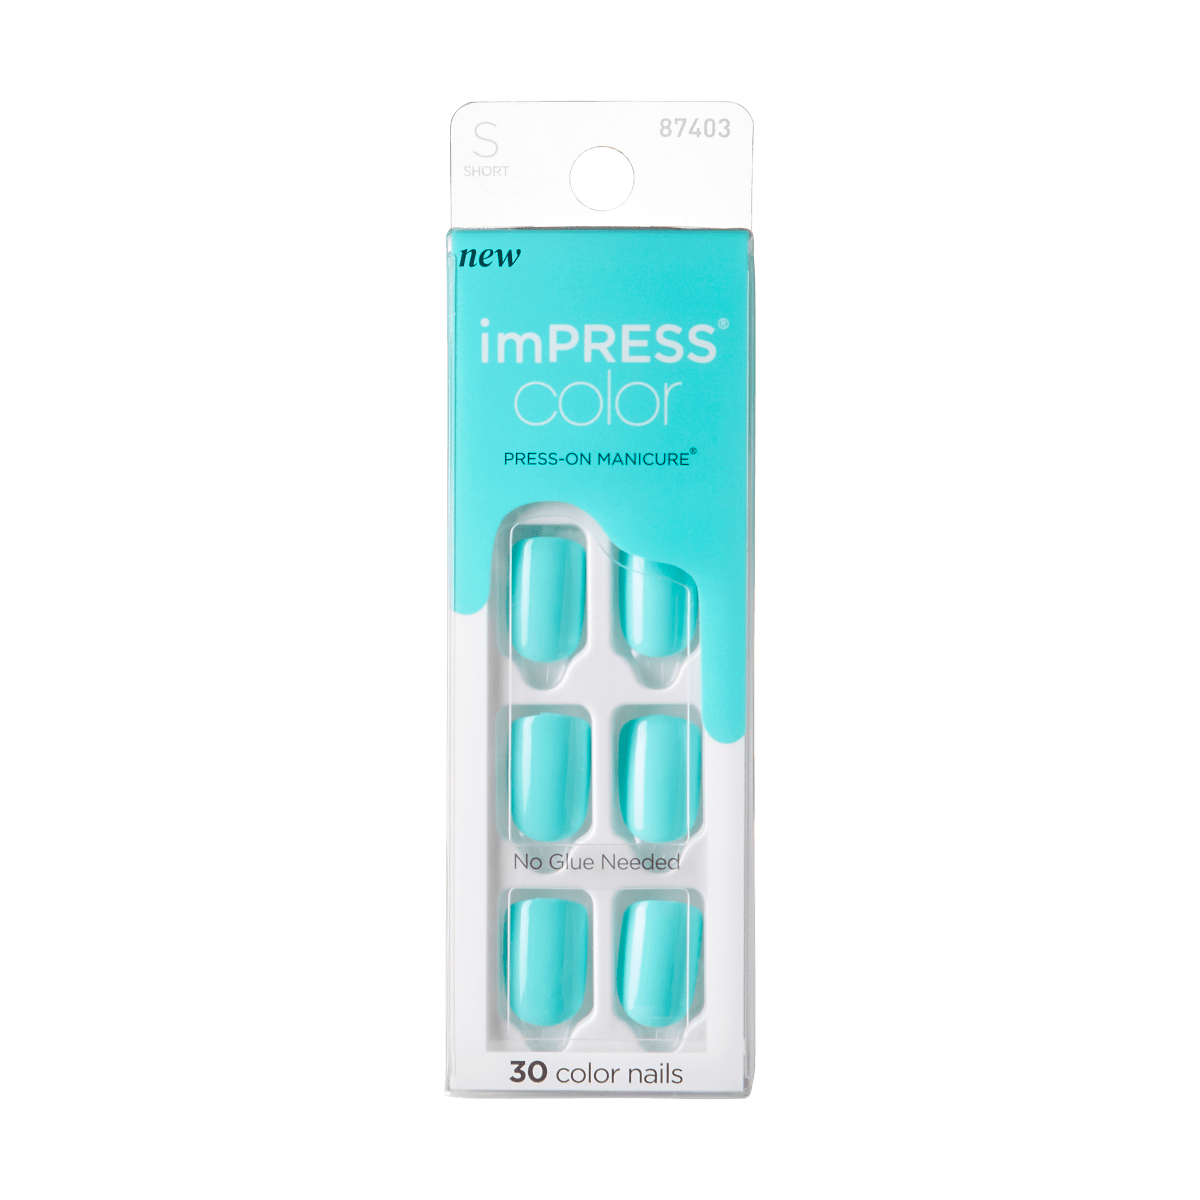 imPRESS Color Press-On Manicure - Abstract